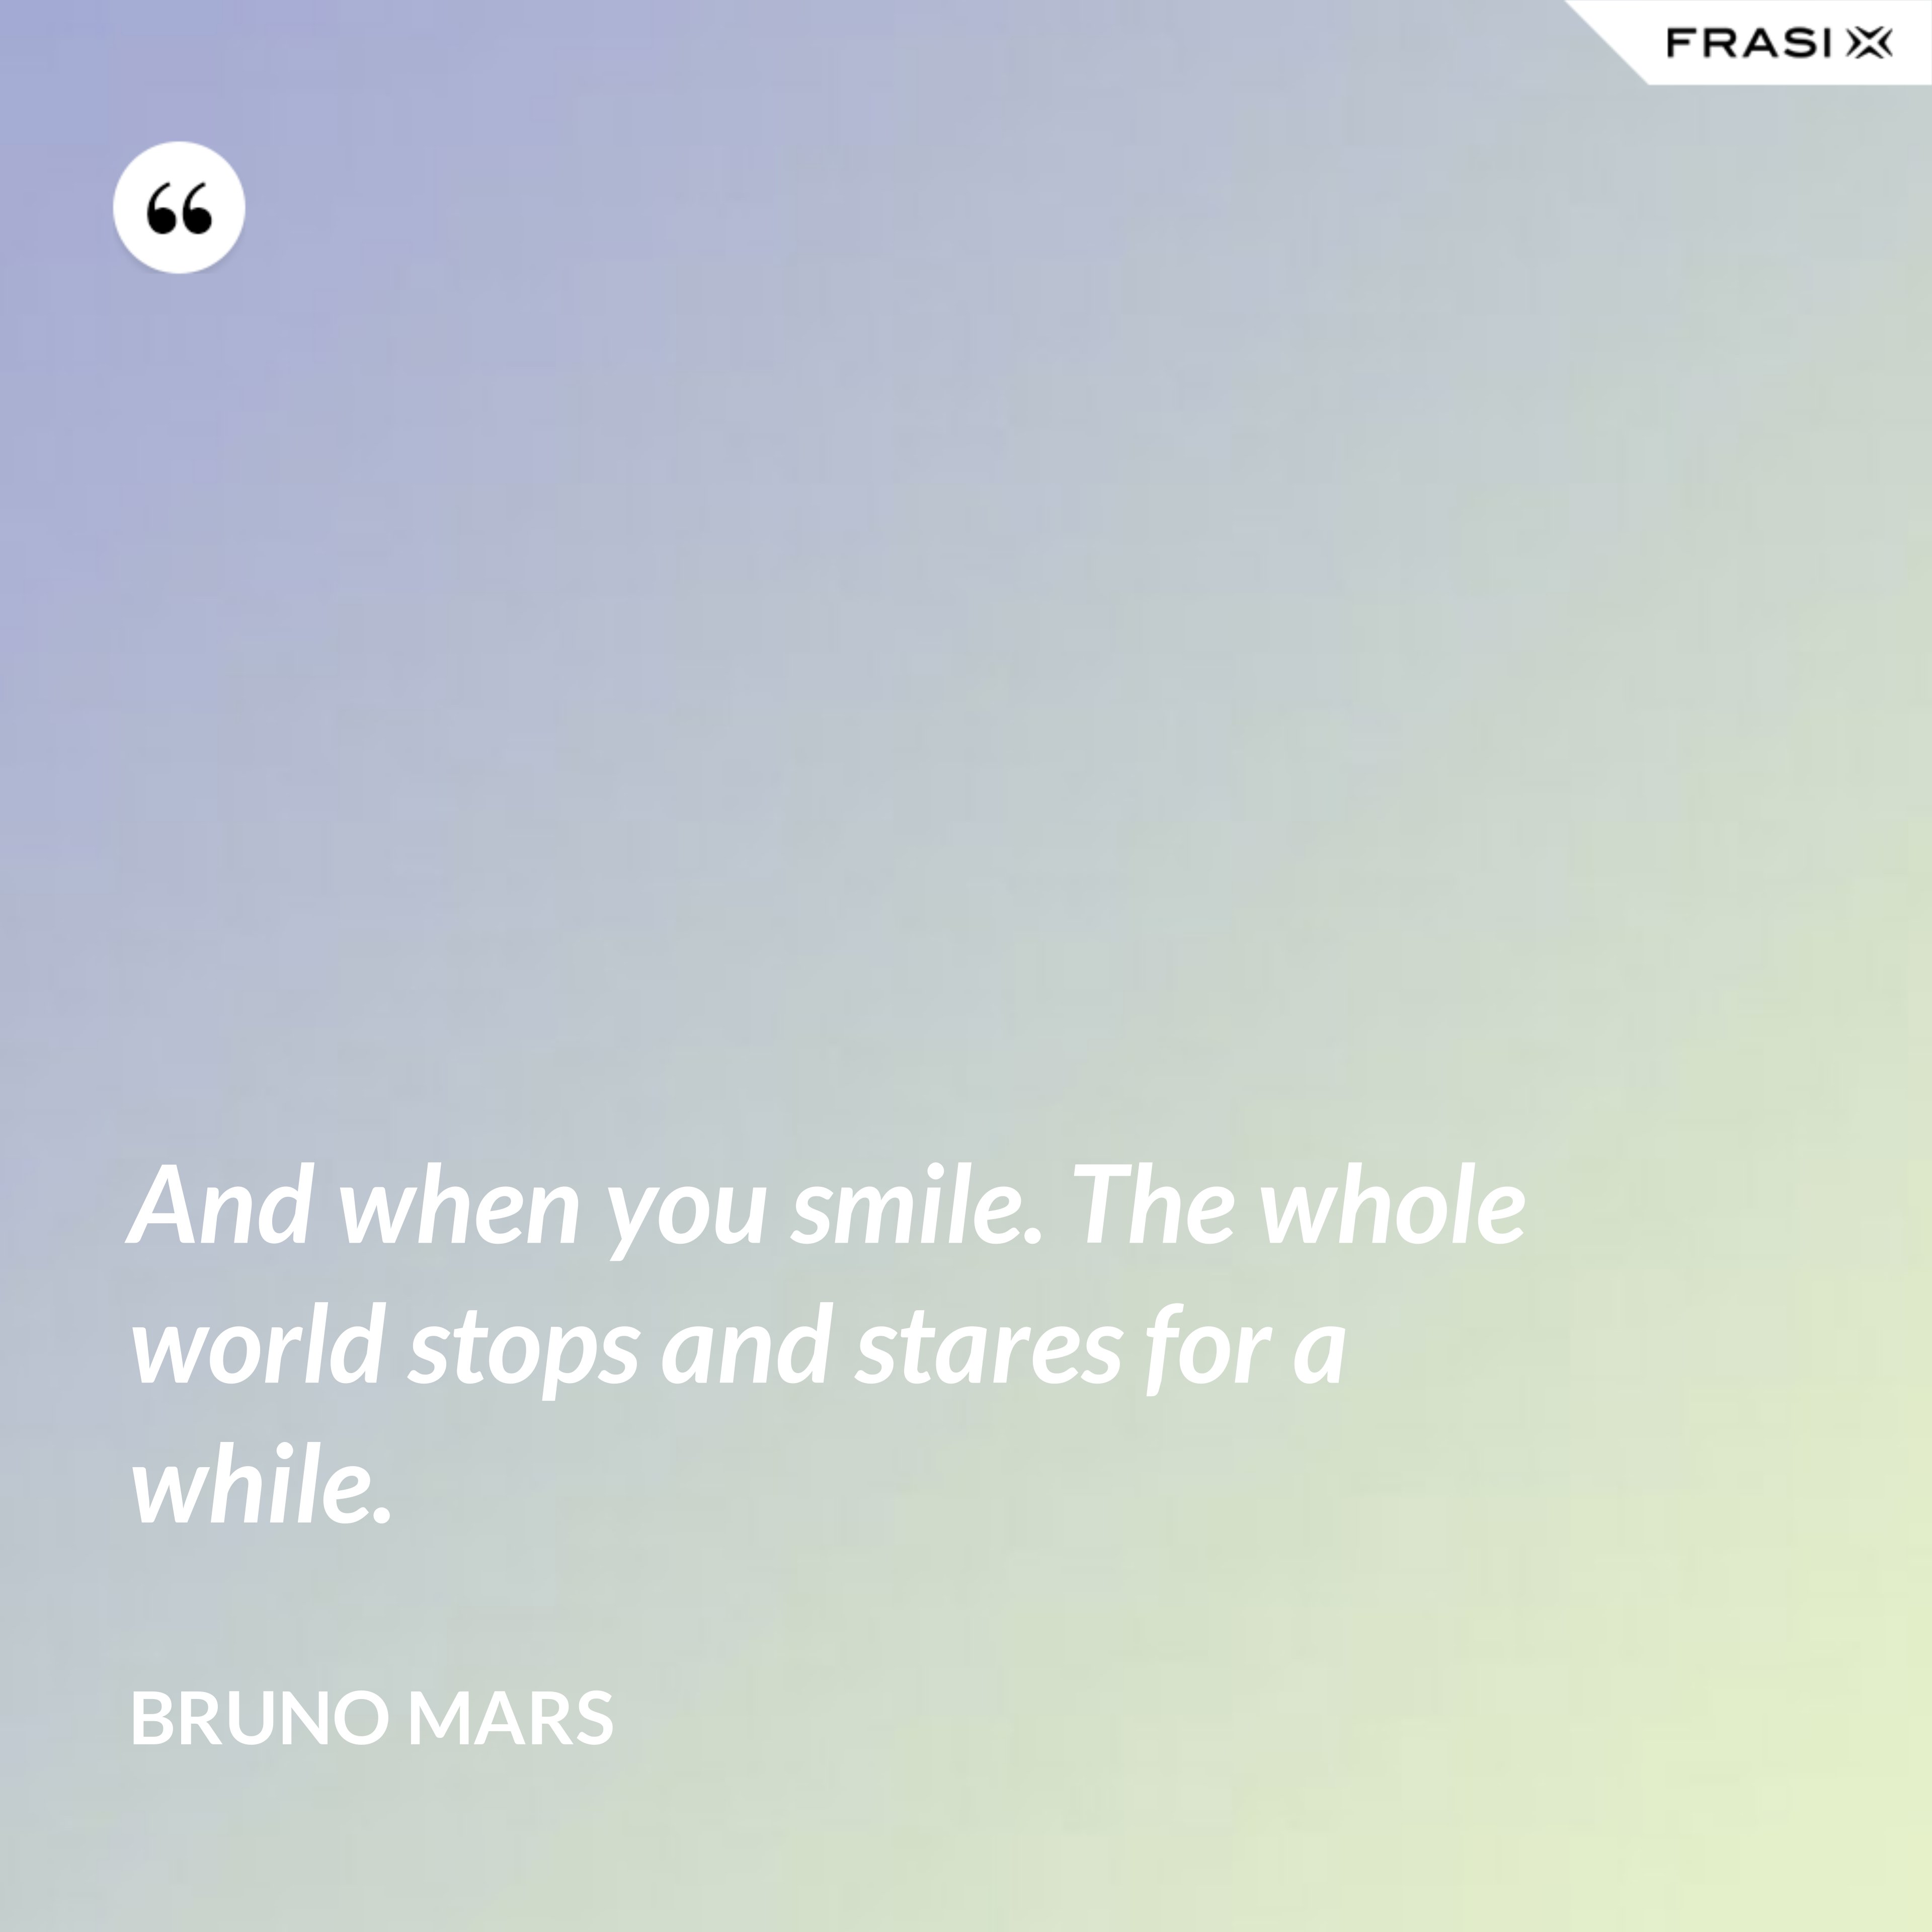 And when you smile. The whole world stops and stares for a while. - Bruno Mars